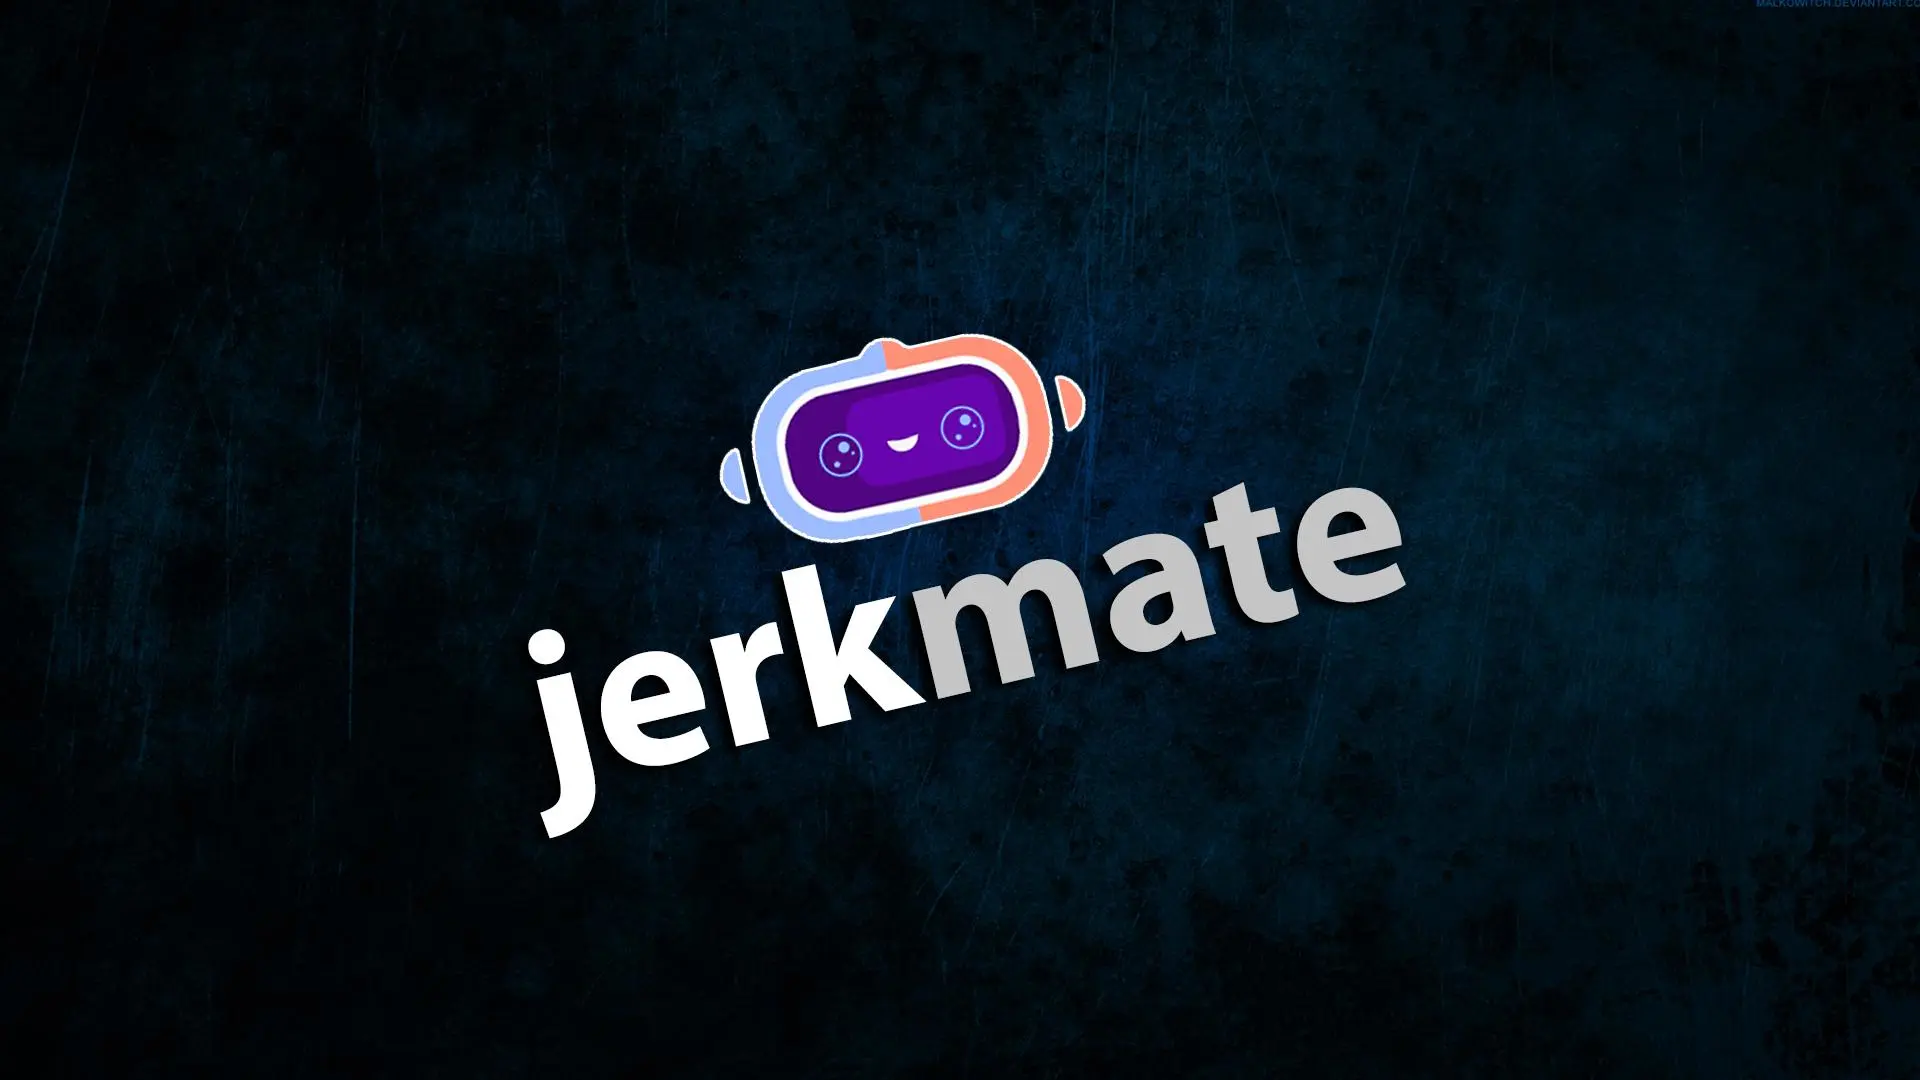 Download The Jerkmate Live Application Game android on PC